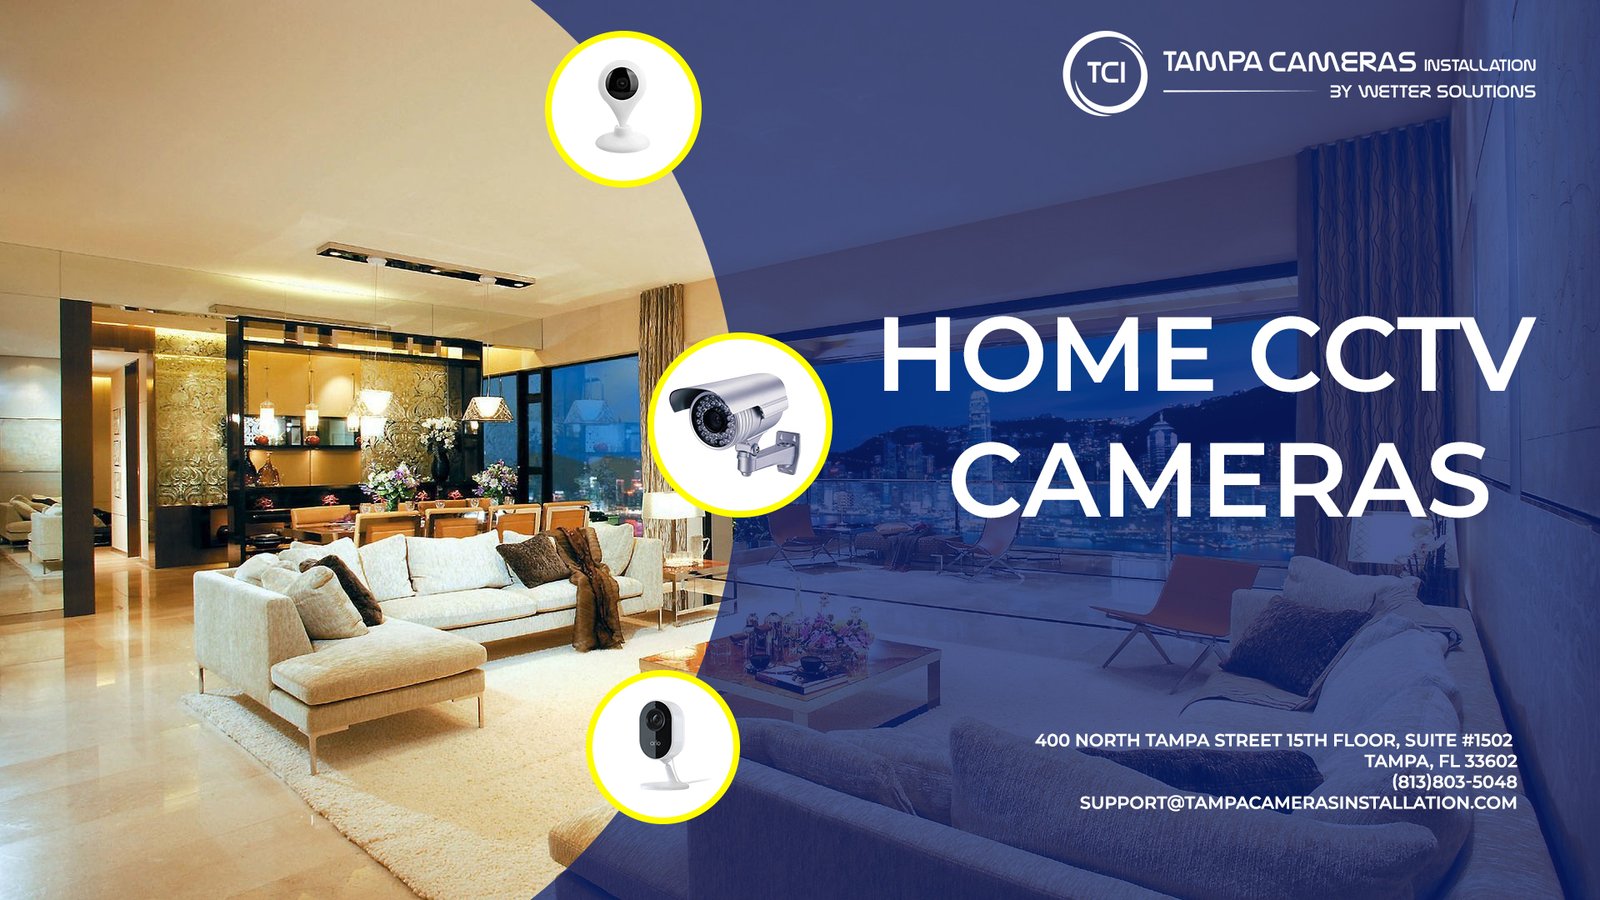 Home CCTV Cameras in tampa